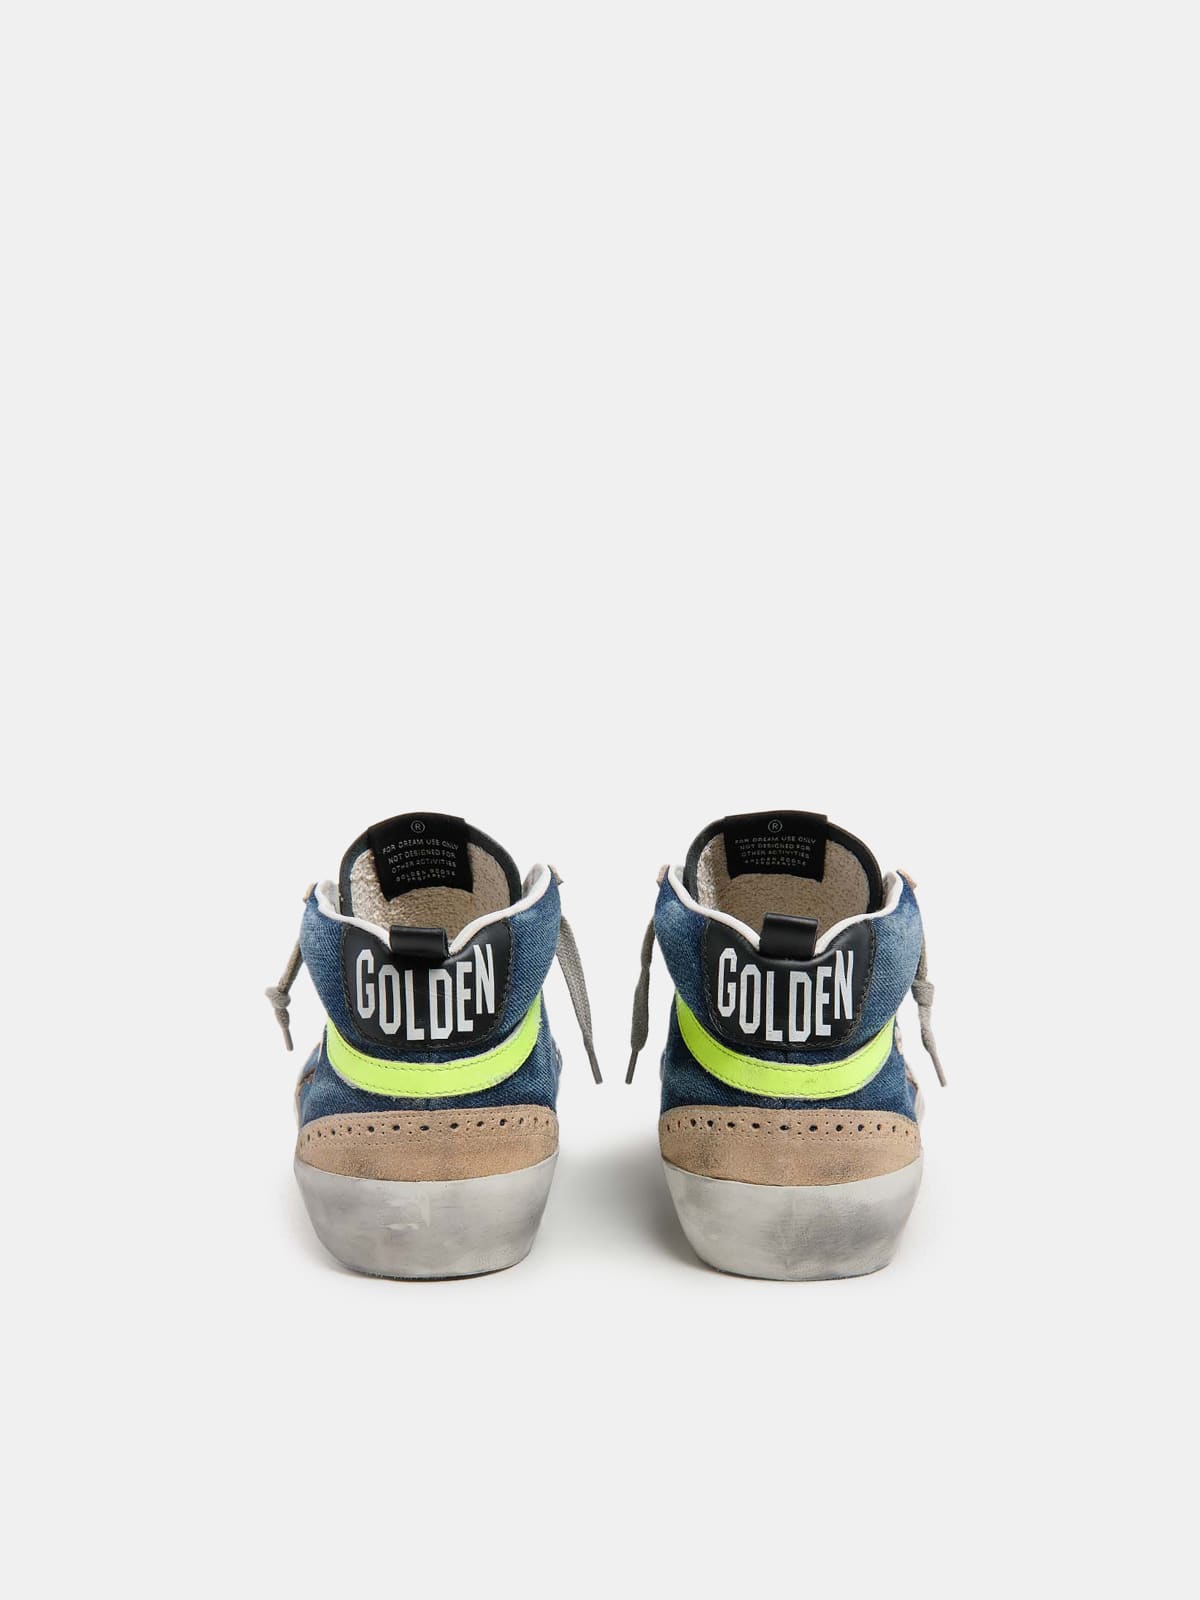 Mid Star sneakers in denim and suede with leopard-print pony skin star |  Golden Goose